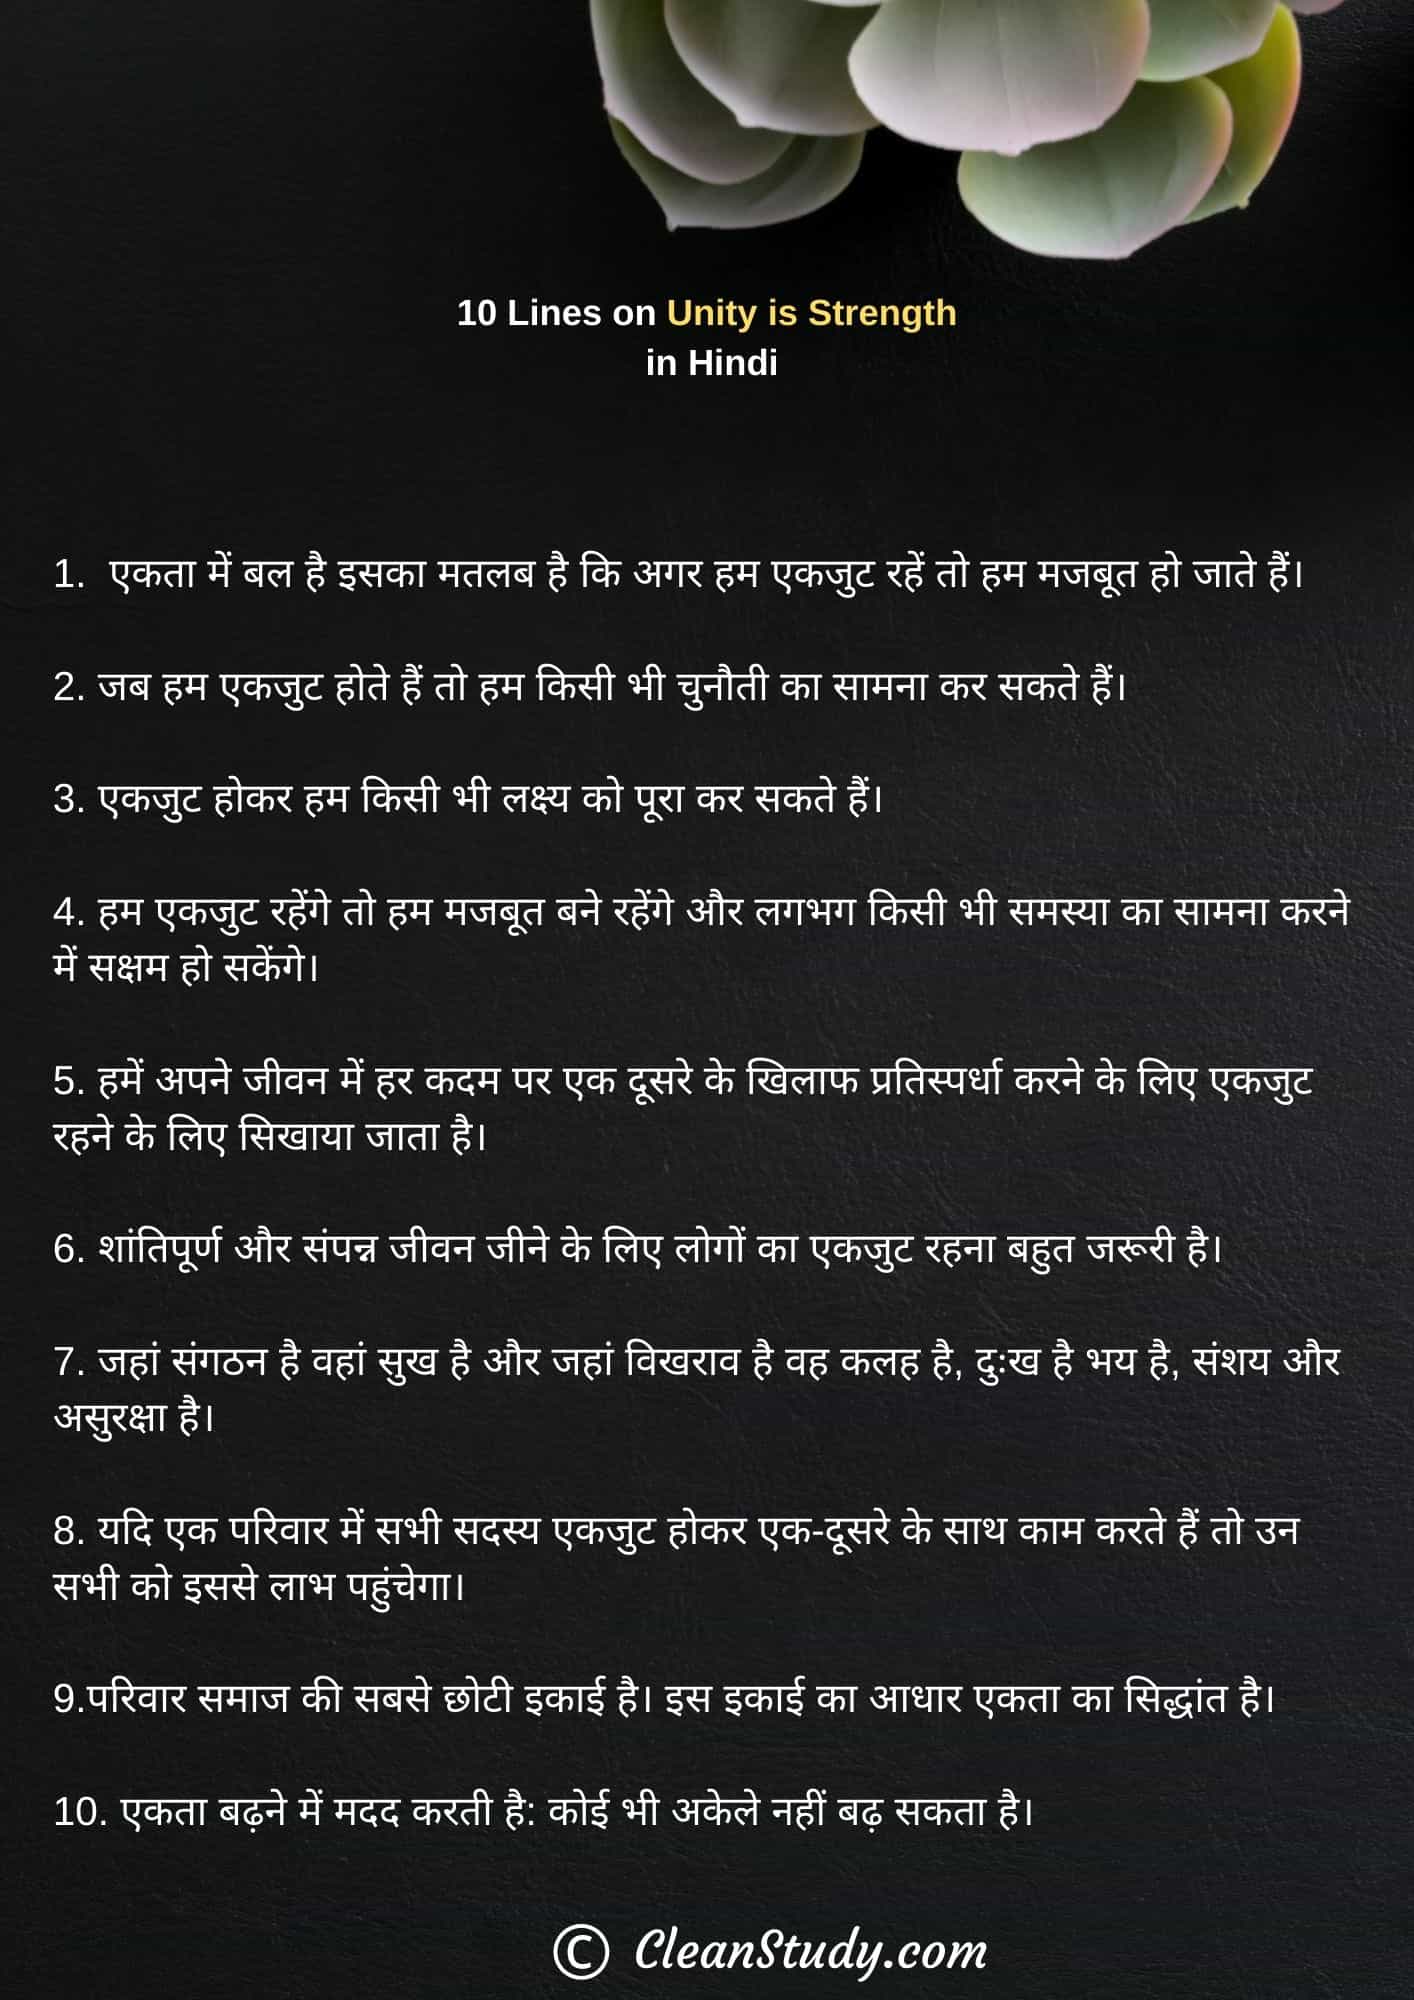 10 Lines on Unity is Strength in Hindi